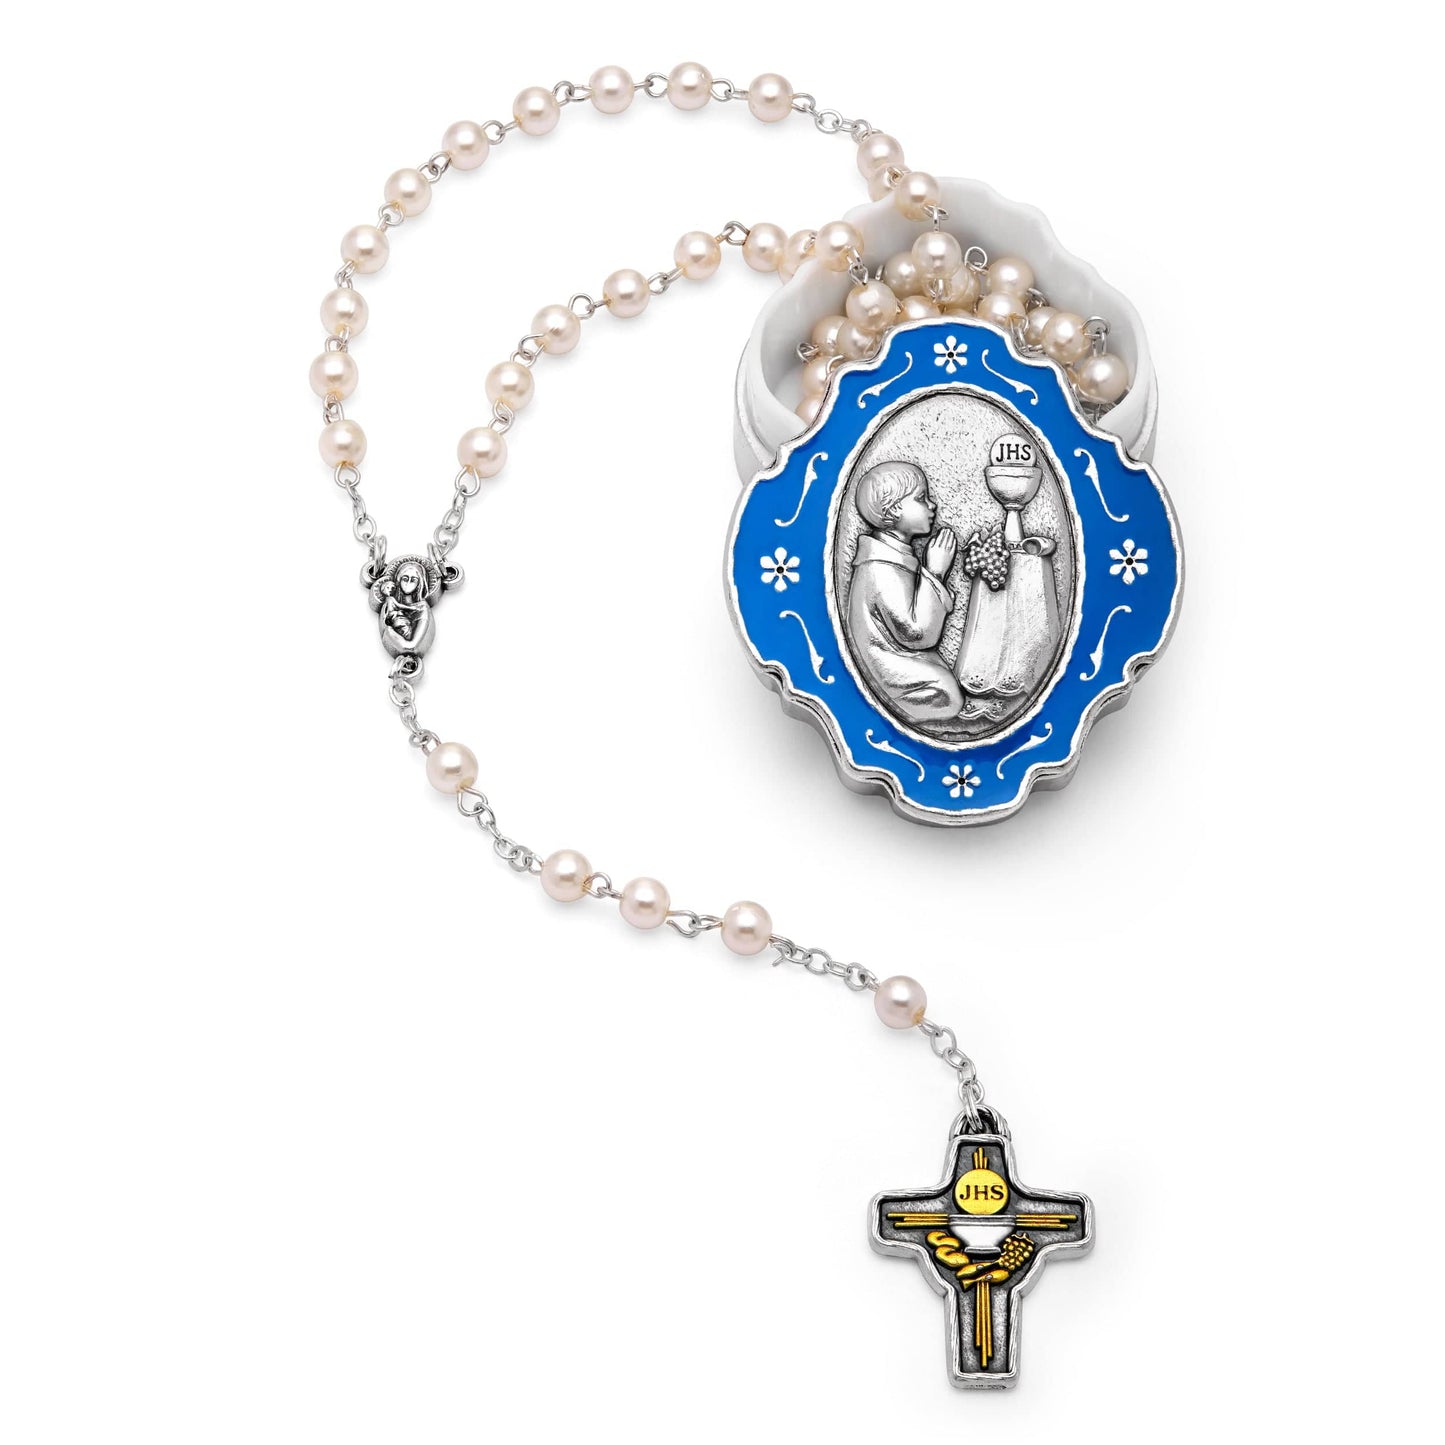 MONDO CATTOLICO Prayer Beads 40 cm (15.78 in) / 4 mm (0.15 in) Case and Rosary for the First Holy Comunion